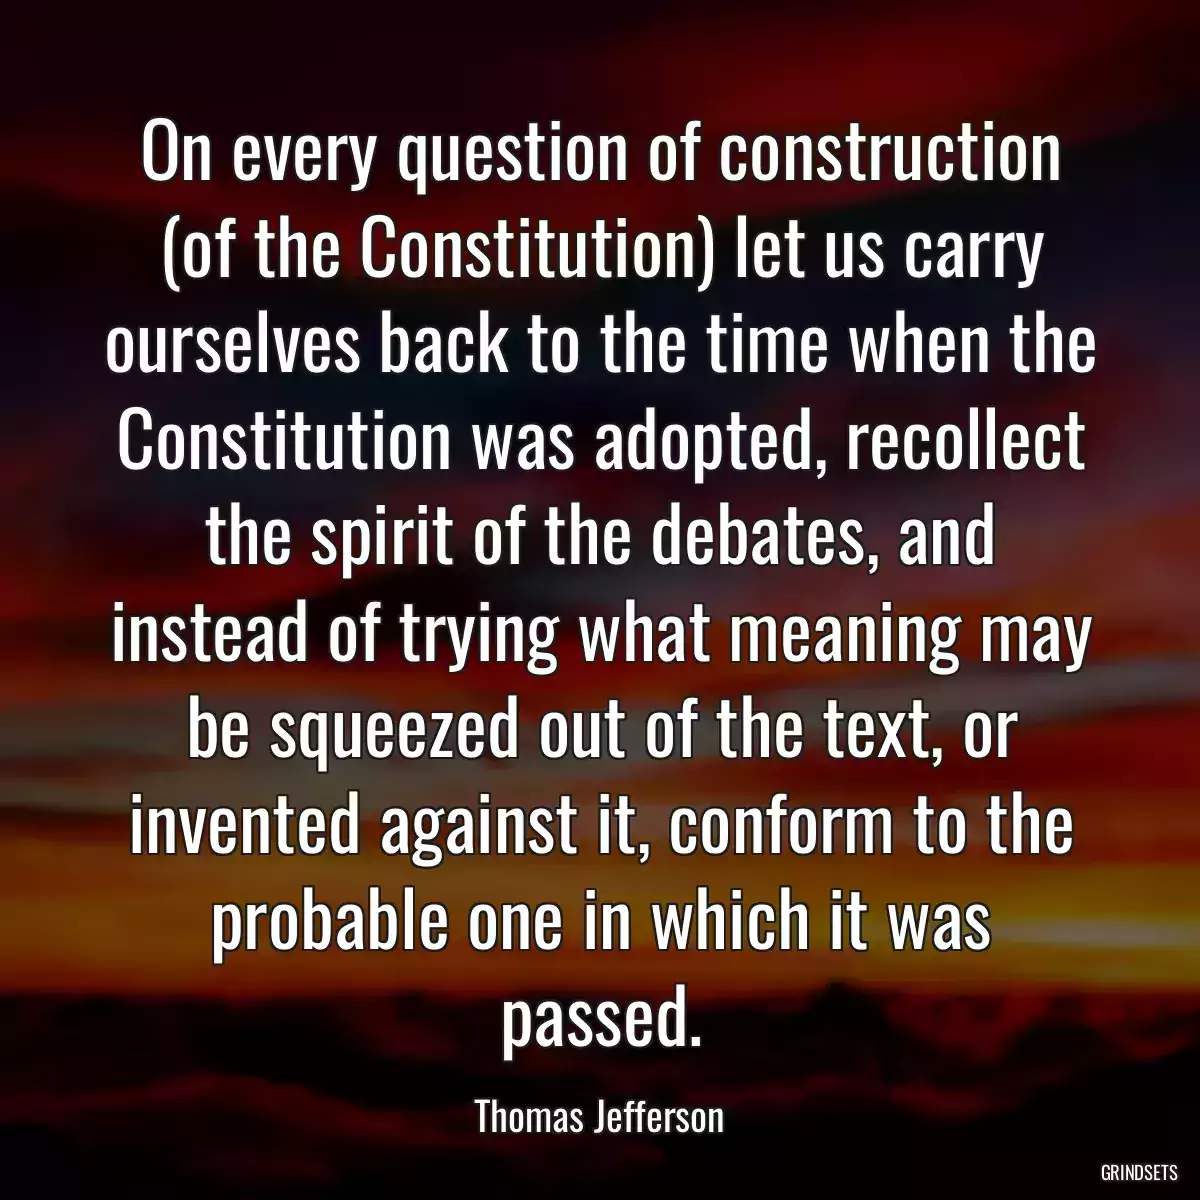 On every question of construction (of the Constitution) let us carry ourselves back to the time when the Constitution was adopted, recollect the spirit of the debates, and instead of trying what meaning may be squeezed out of the text, or invented against it, conform to the probable one in which it was passed.